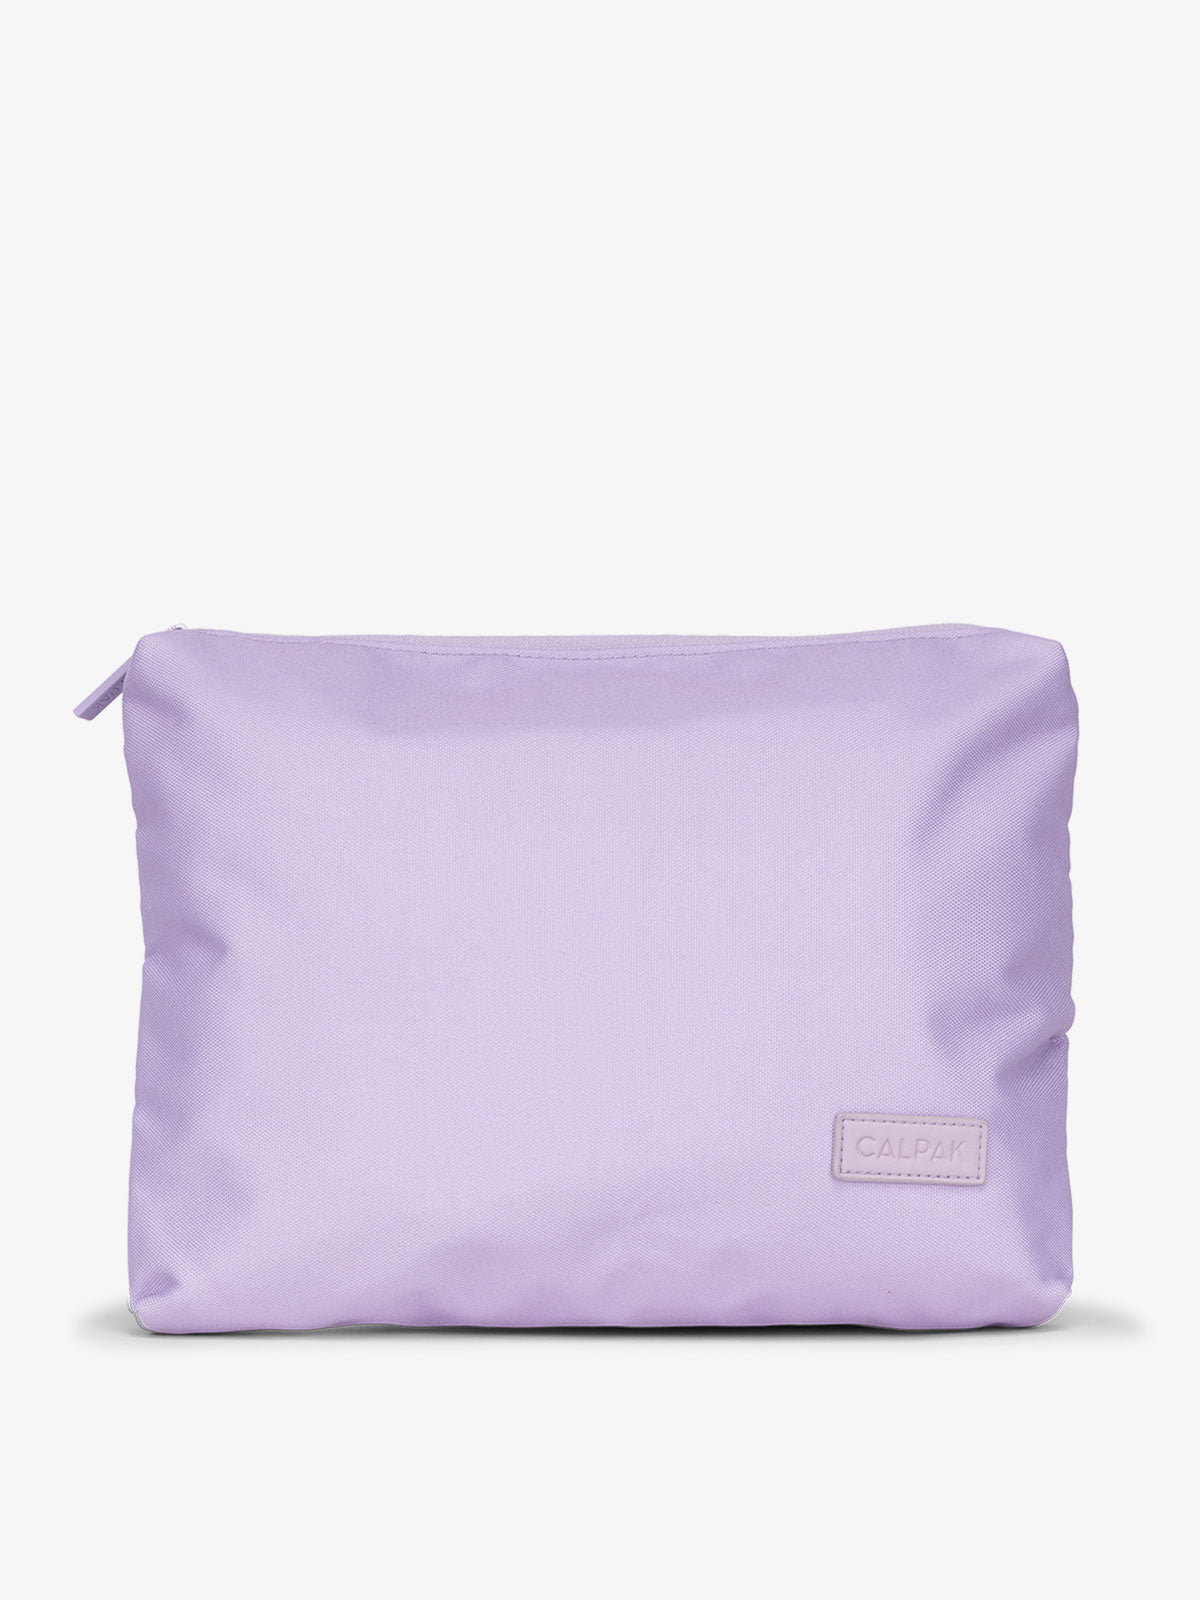 CALPAK water-resistant travel pouch for luggage in orchid